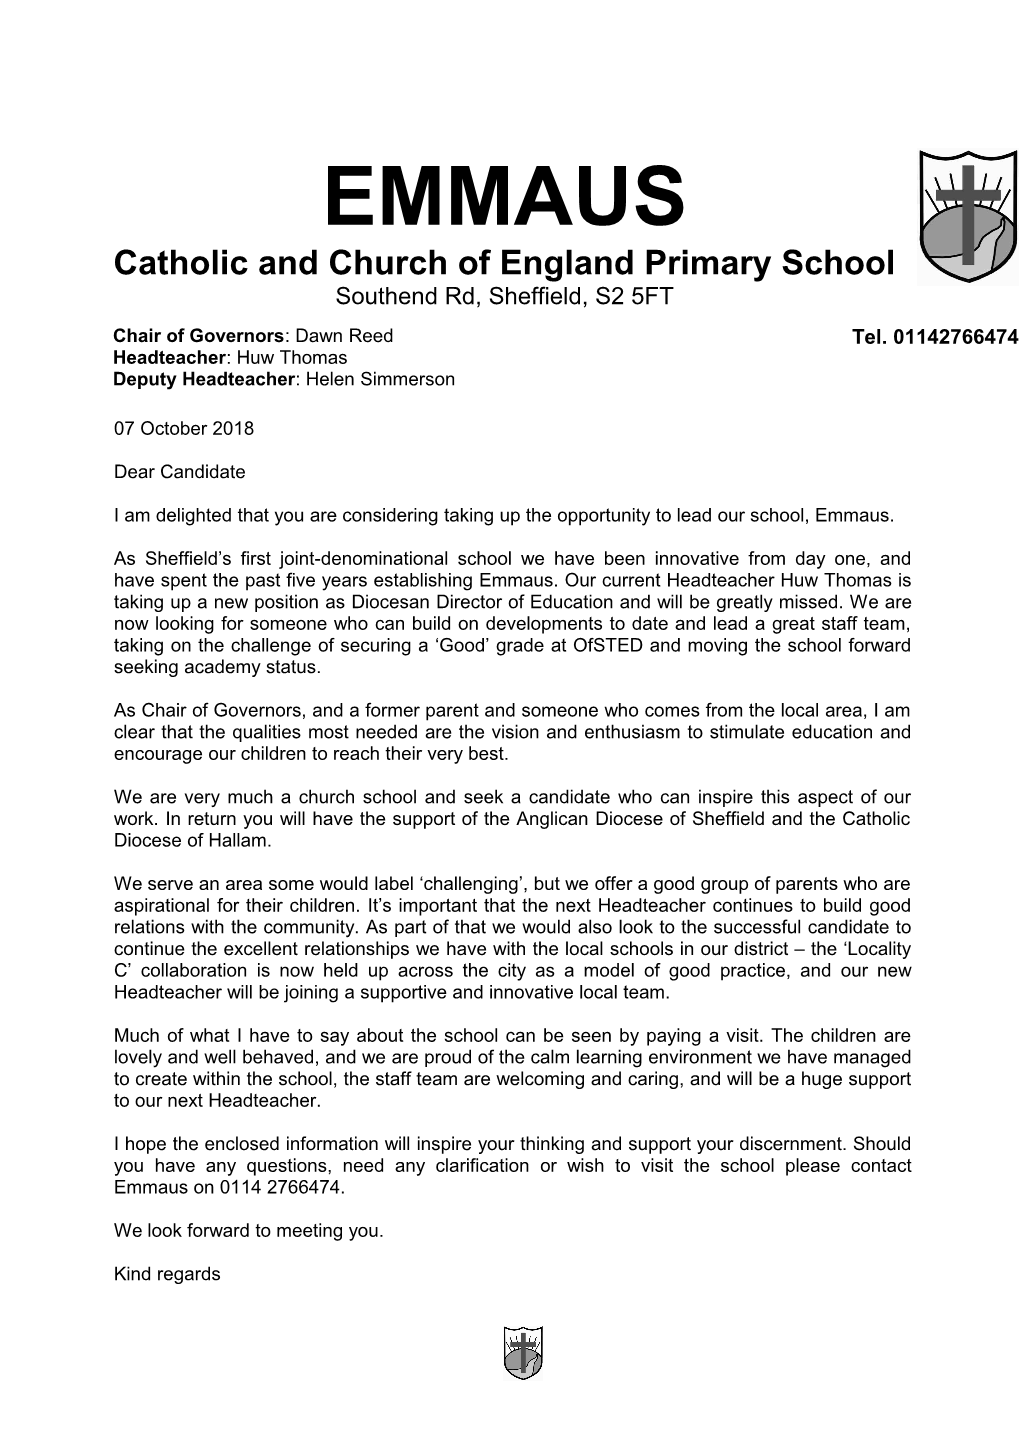 I Am Delighted That You Are Considering Taking up the Opportunity to Lead Our School, Emmaus